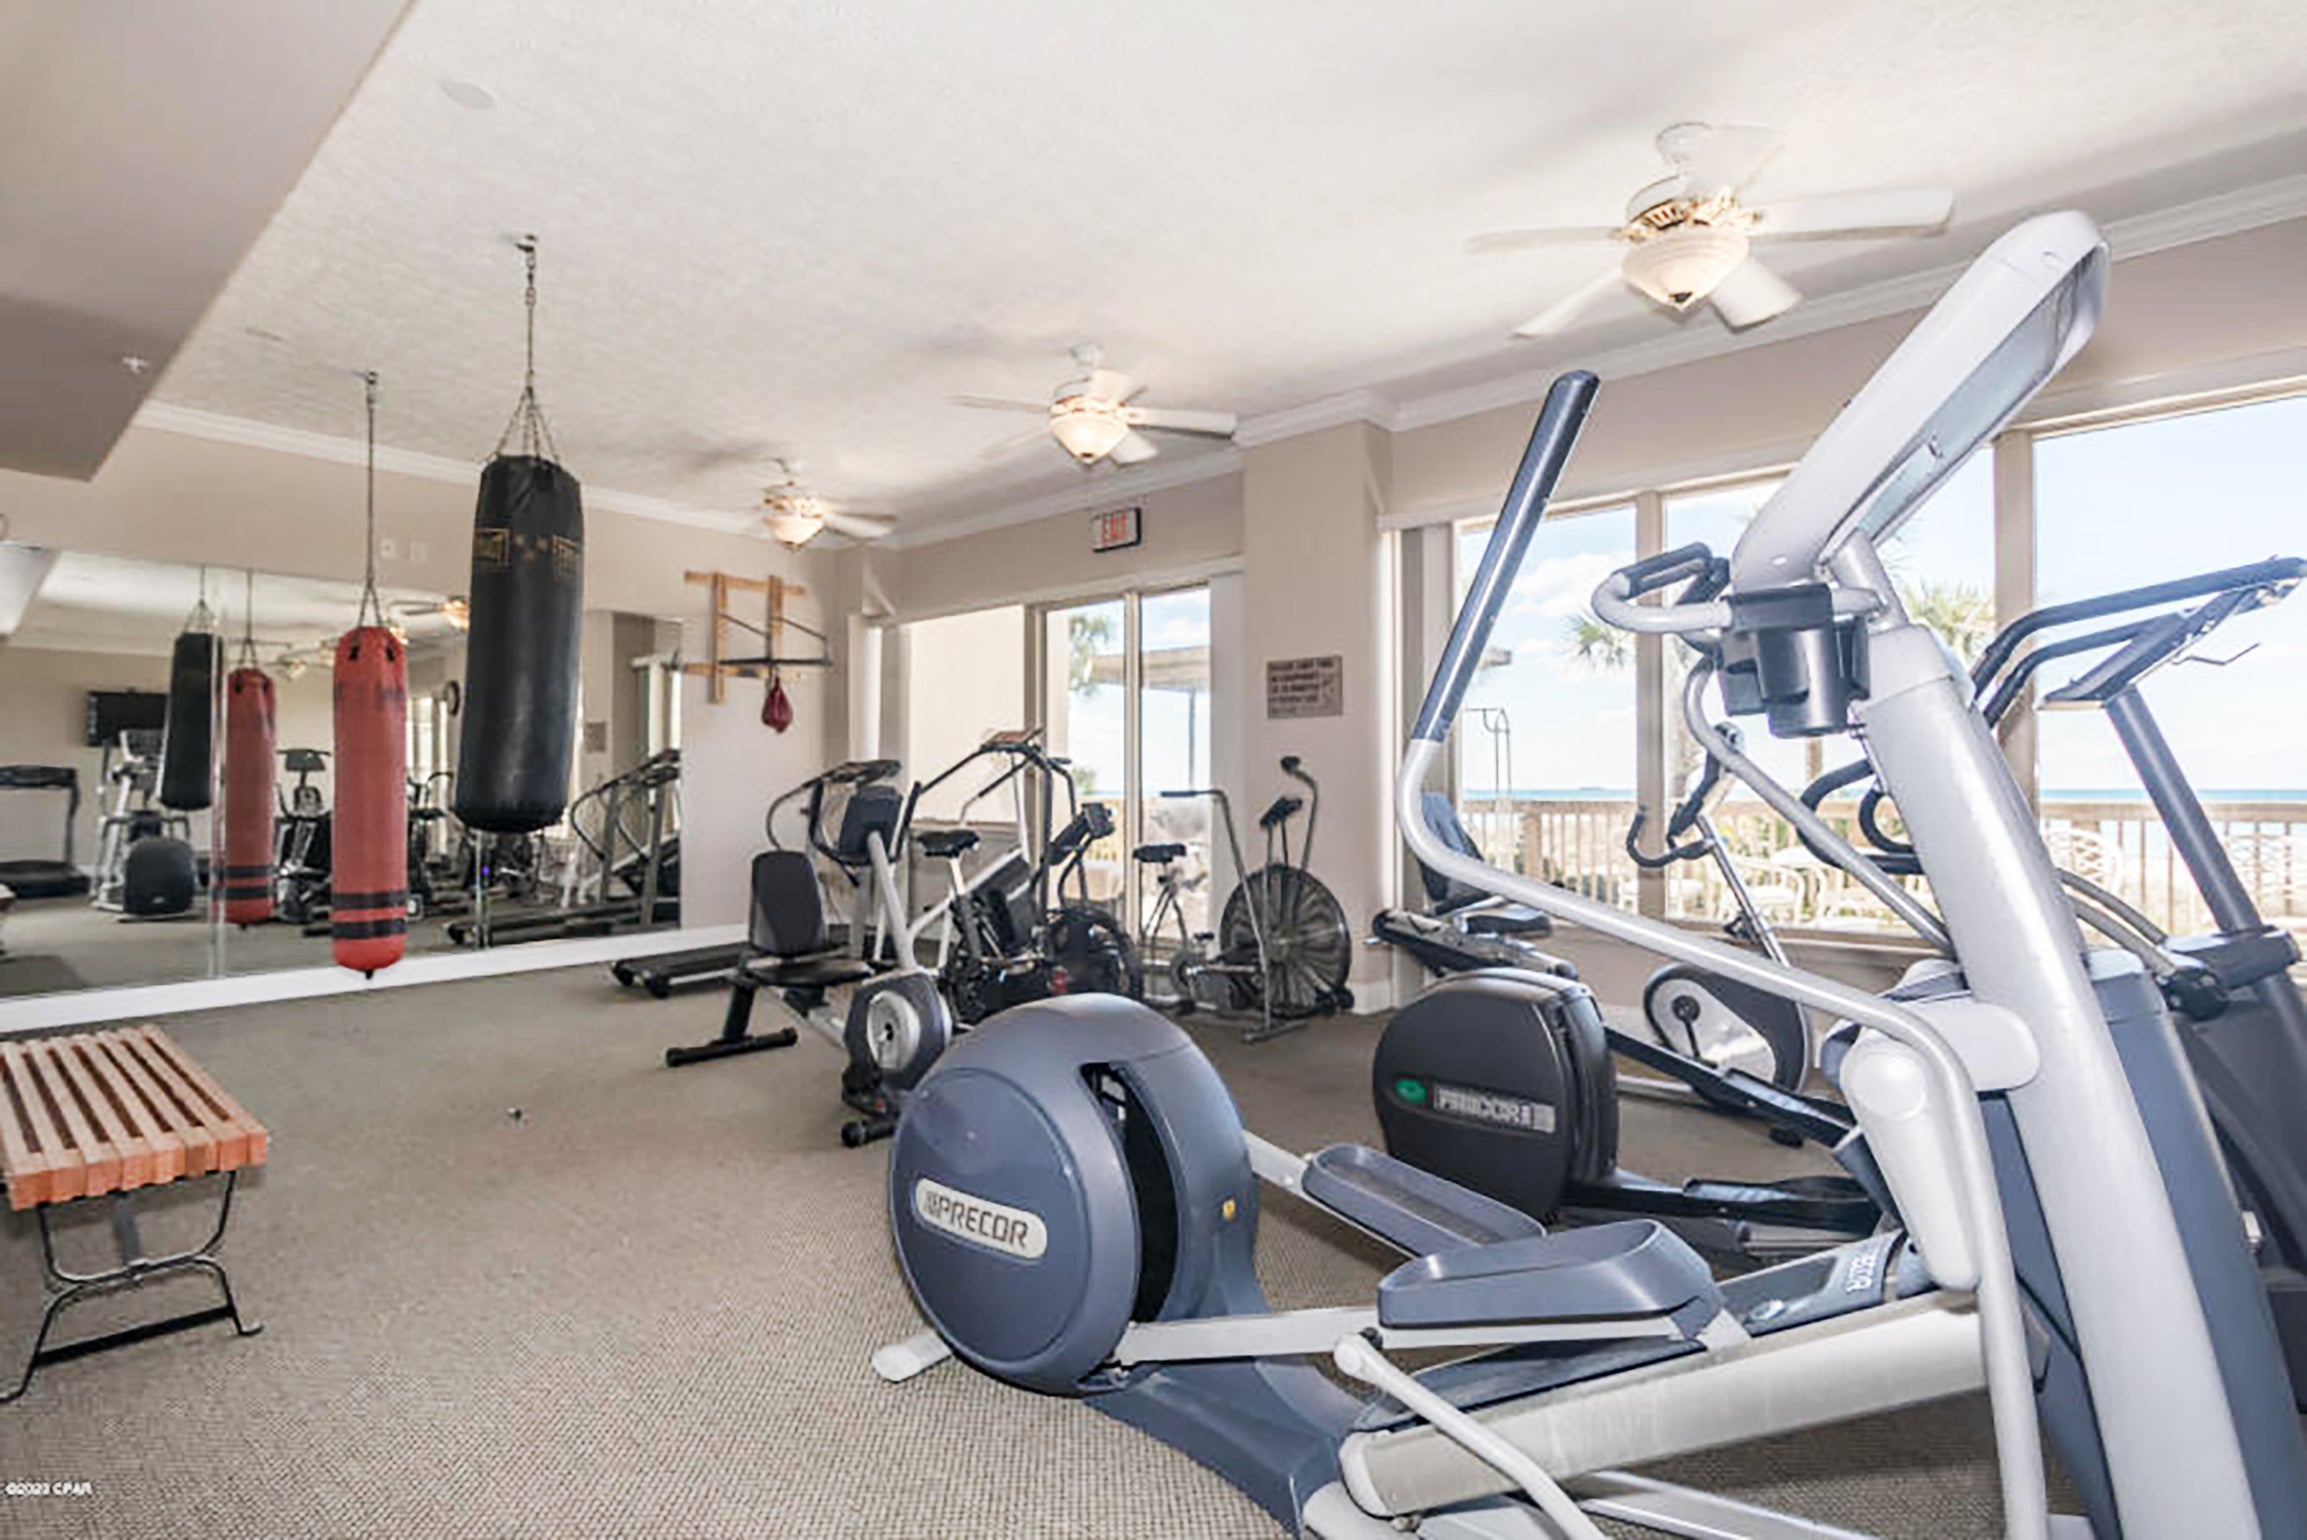 Beach front exercise room